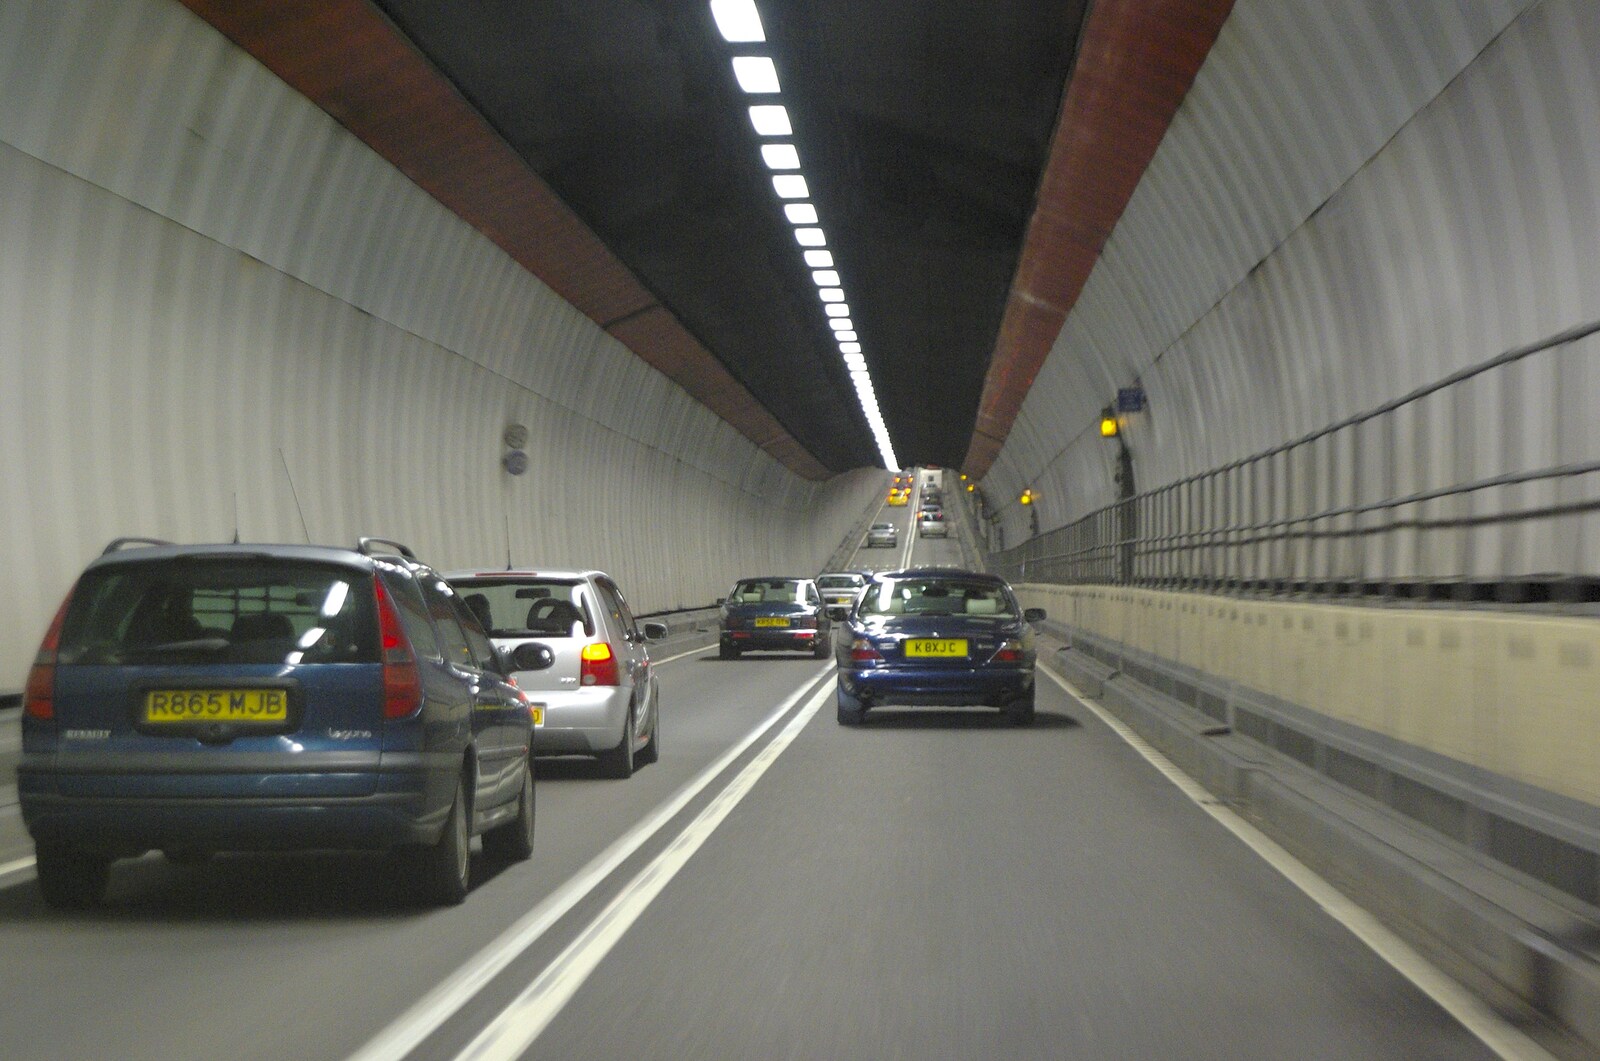 The BBs On Tour, Gatwick Copthorne, West Sussex - 24th November 2007: Cars in the Dartford Tunnel